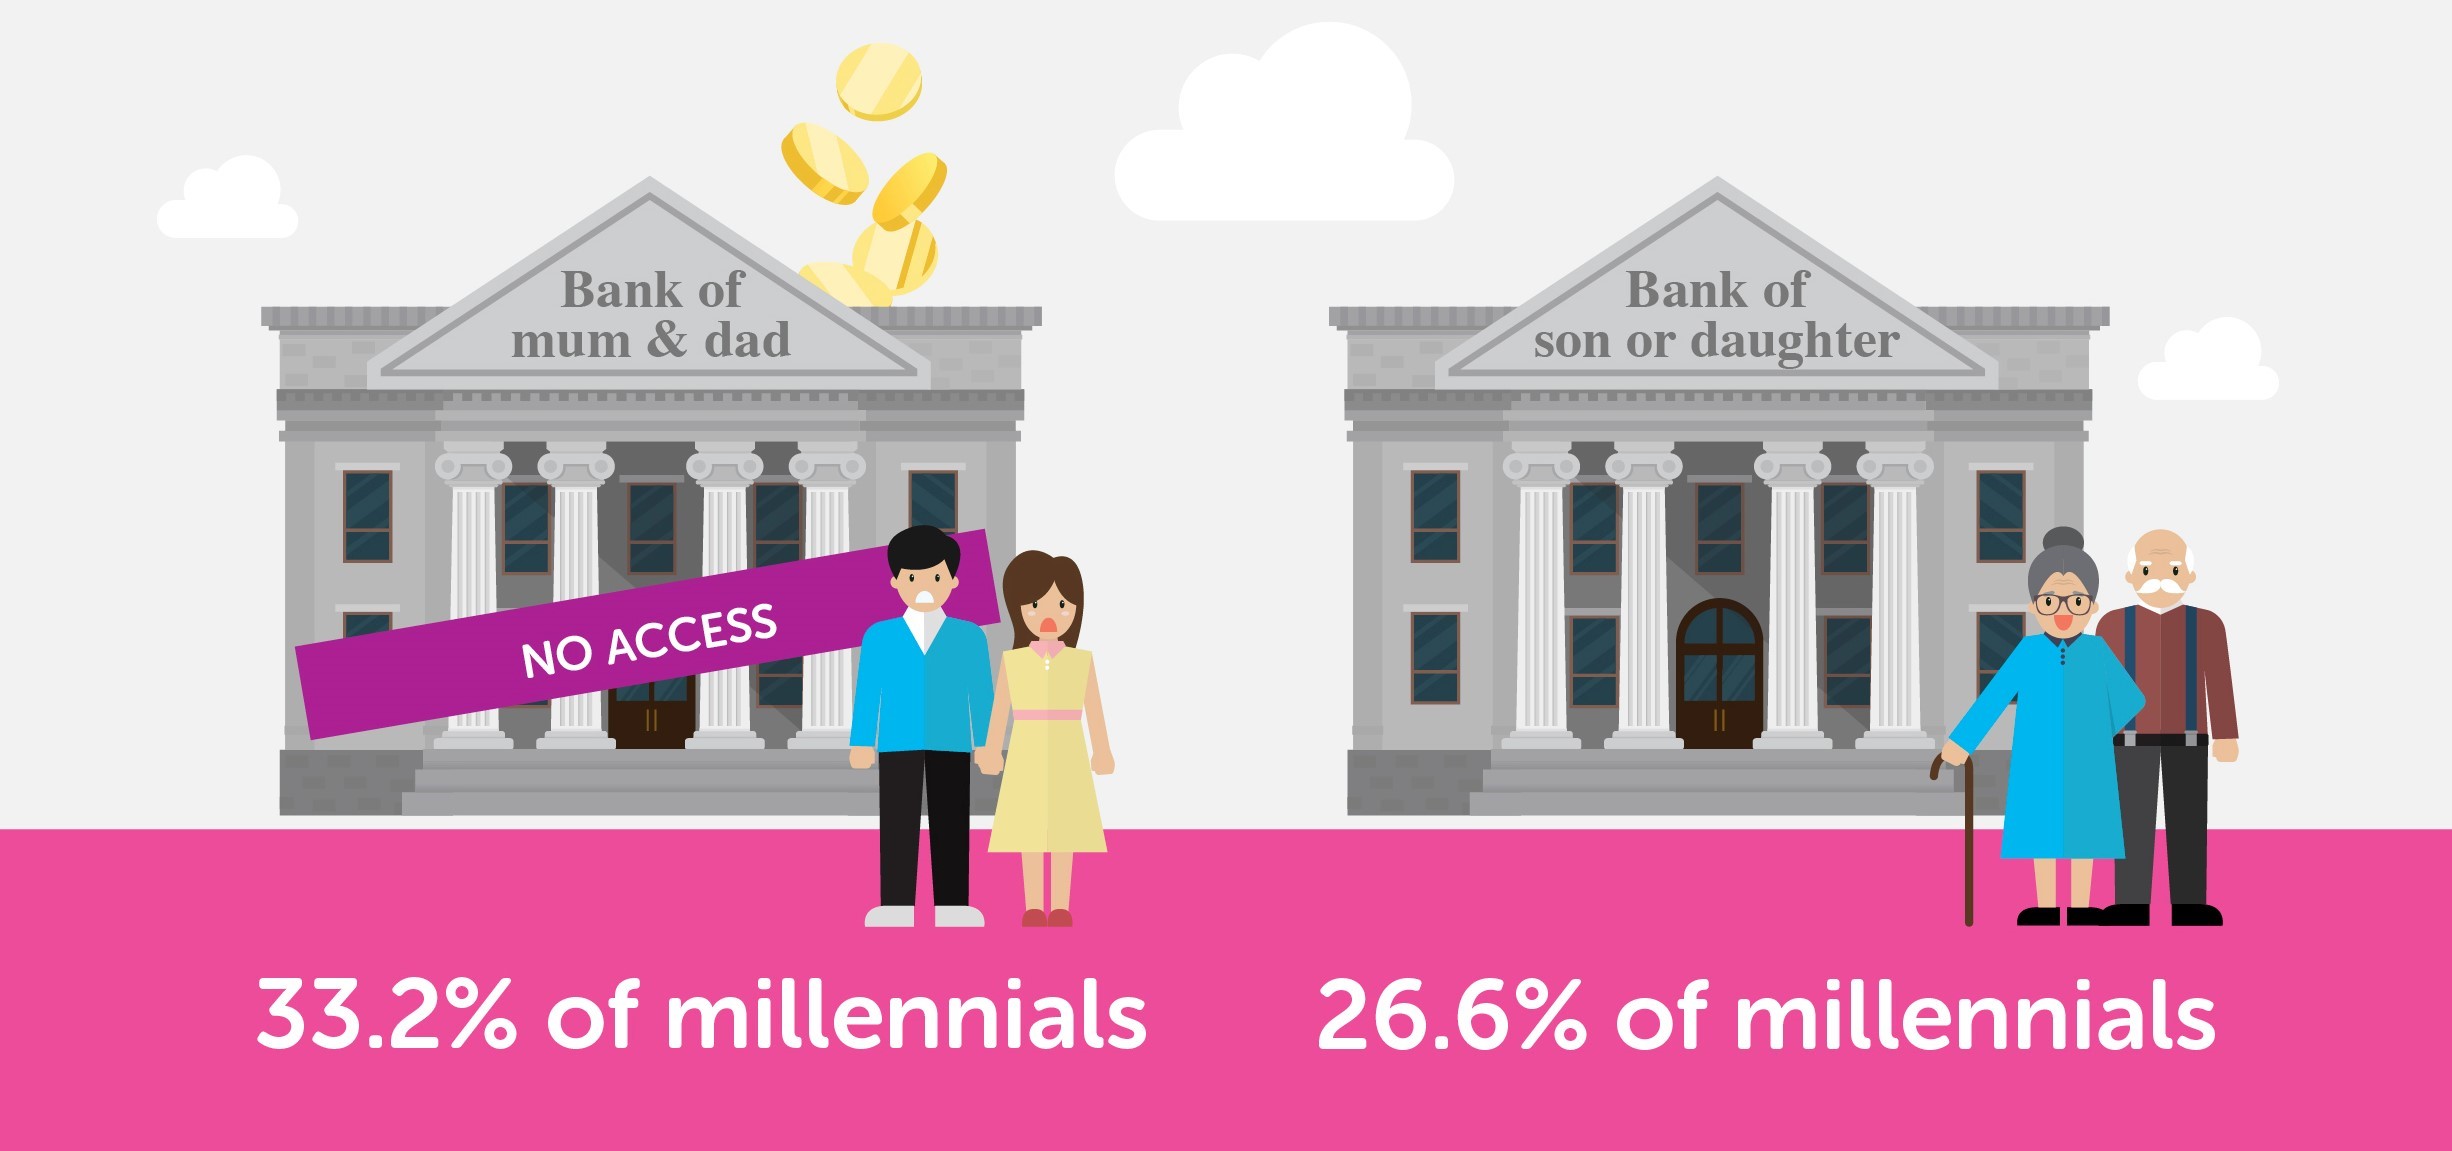 Bank of mum and dad trend shifts to bank of son or daughter alt